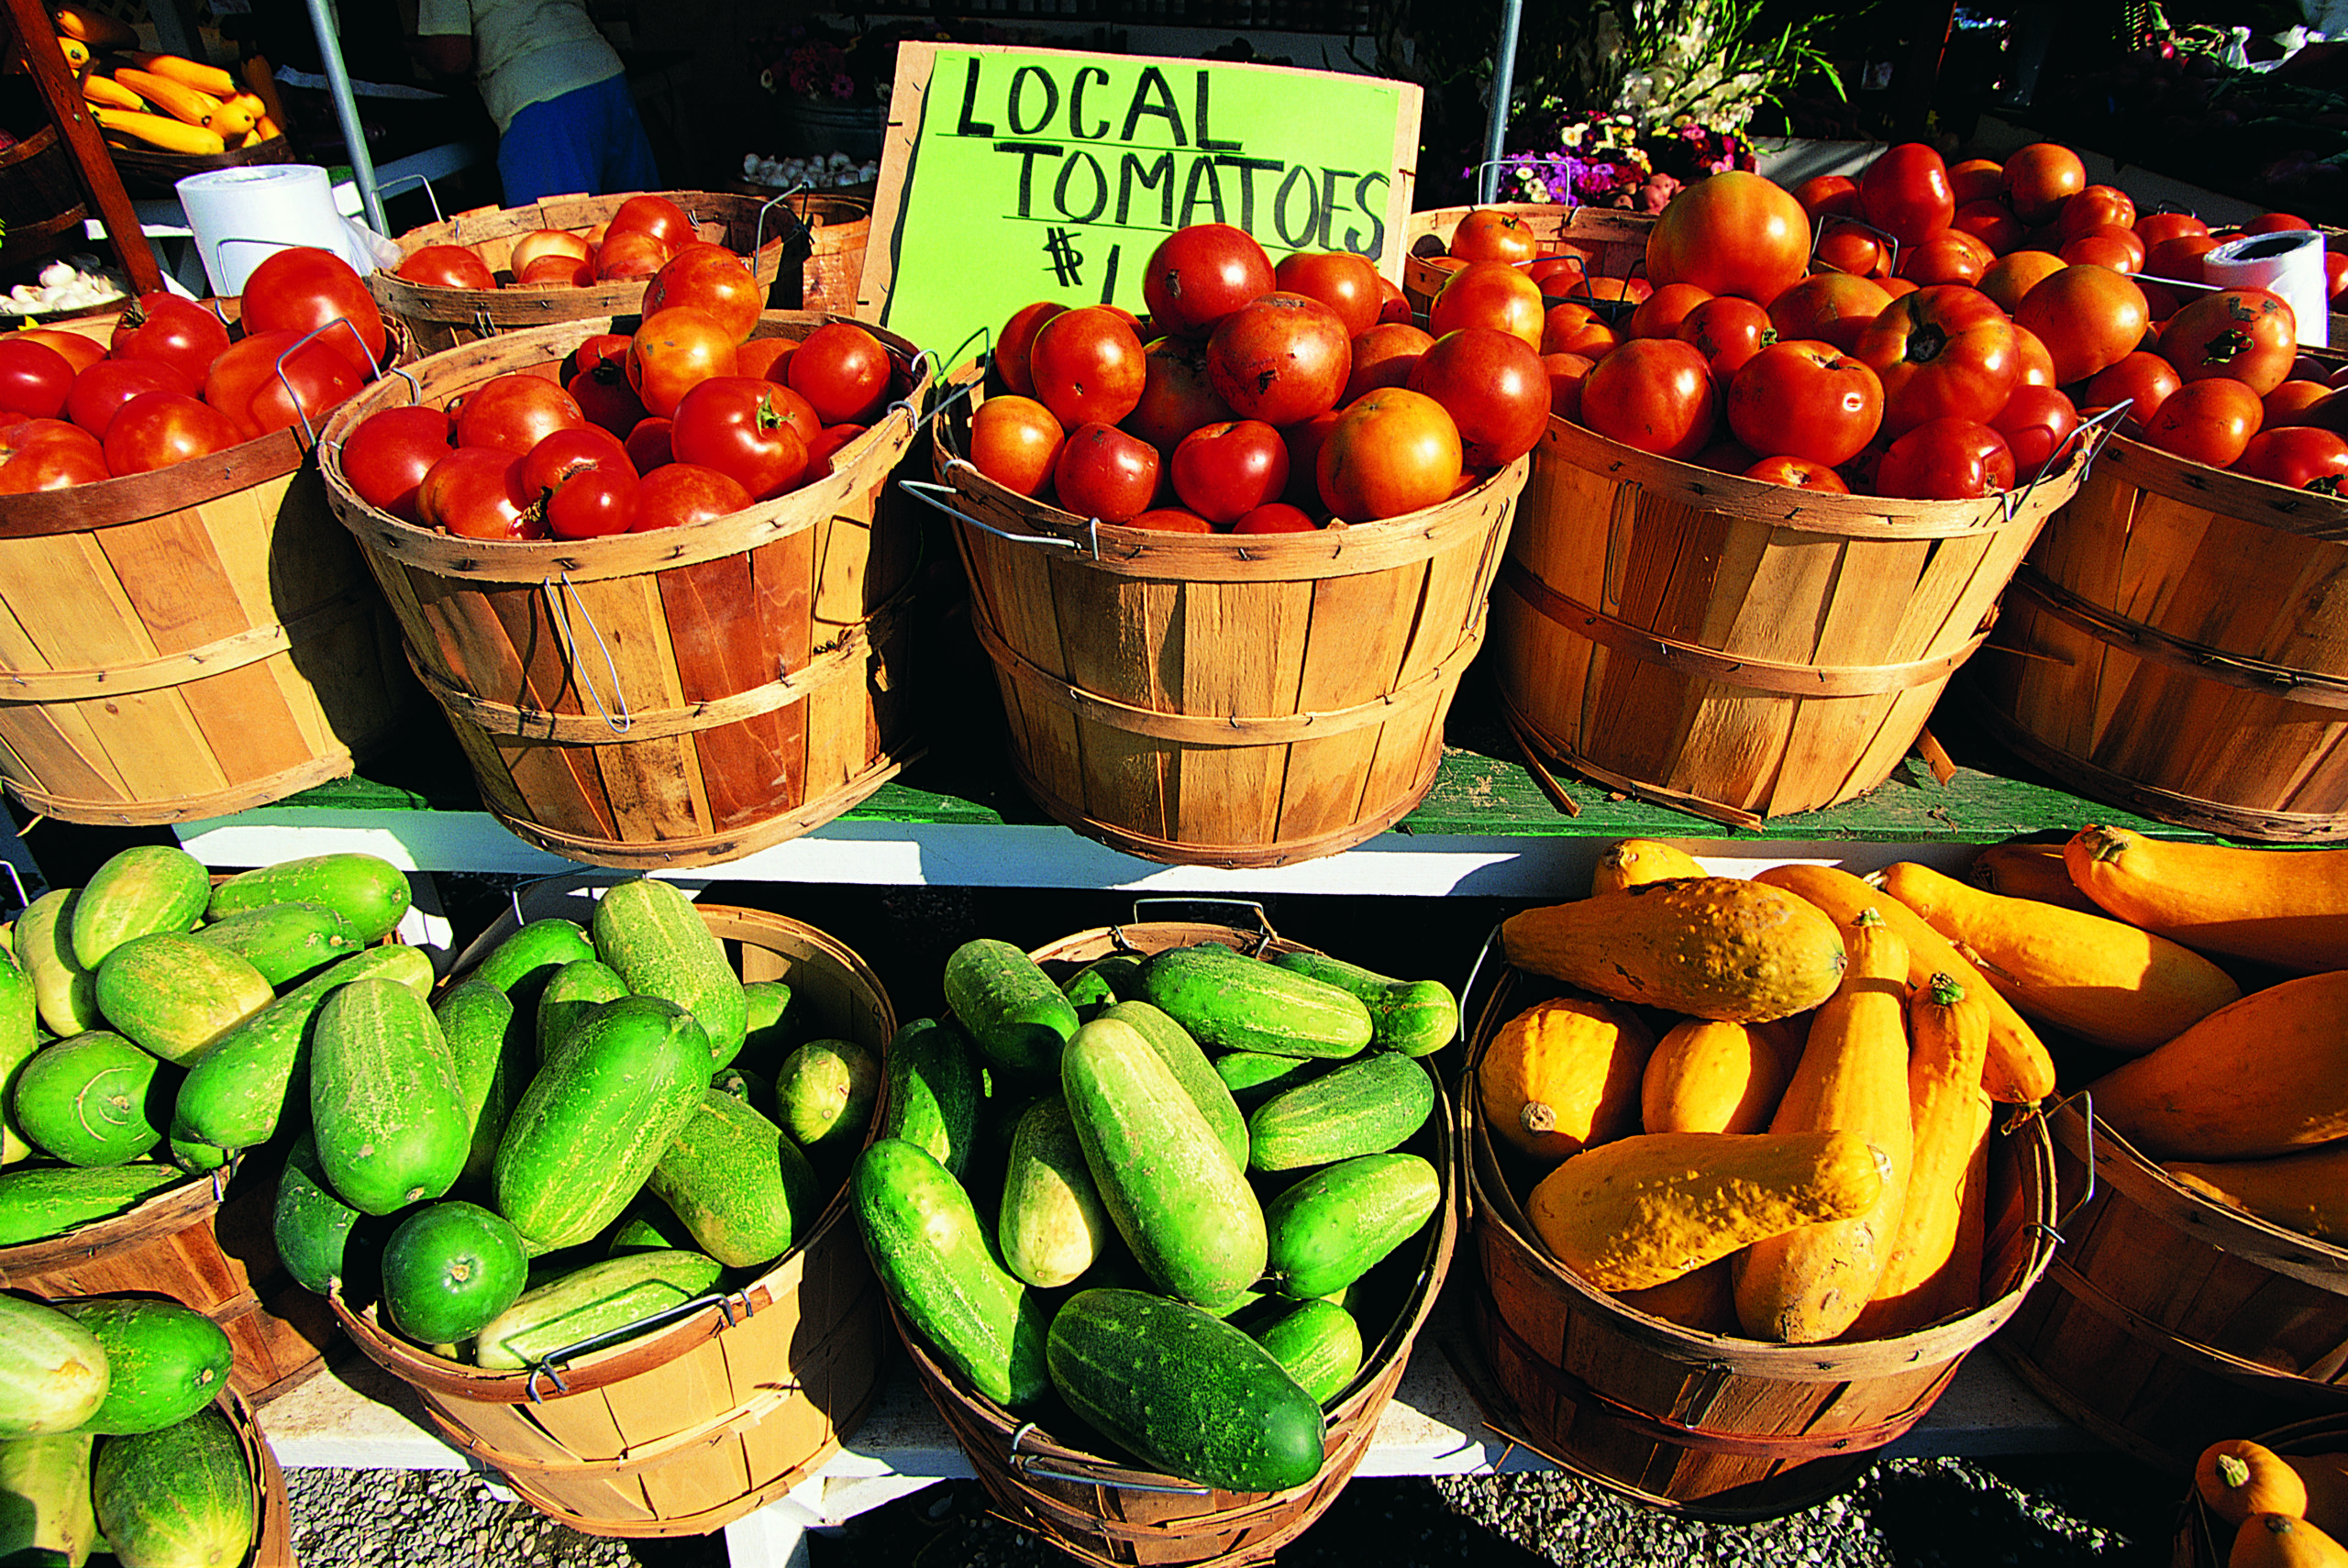 Baskets with fresh produce abound at East End farmers markets